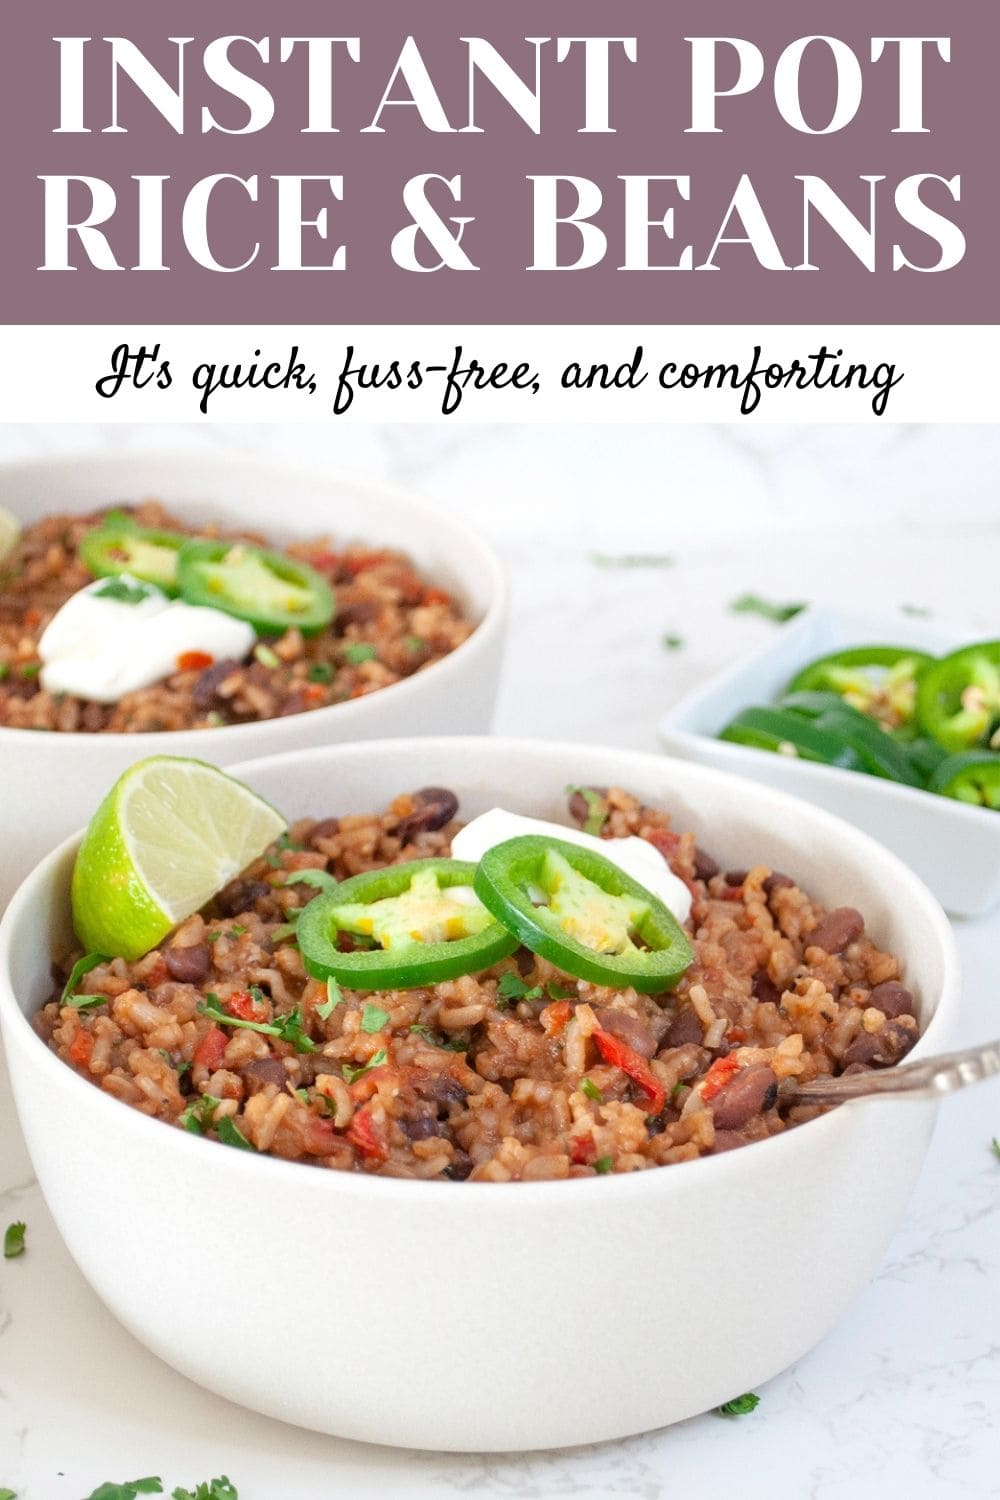 Easy Instant Pot Rice & Beans - Piping Pot Curry